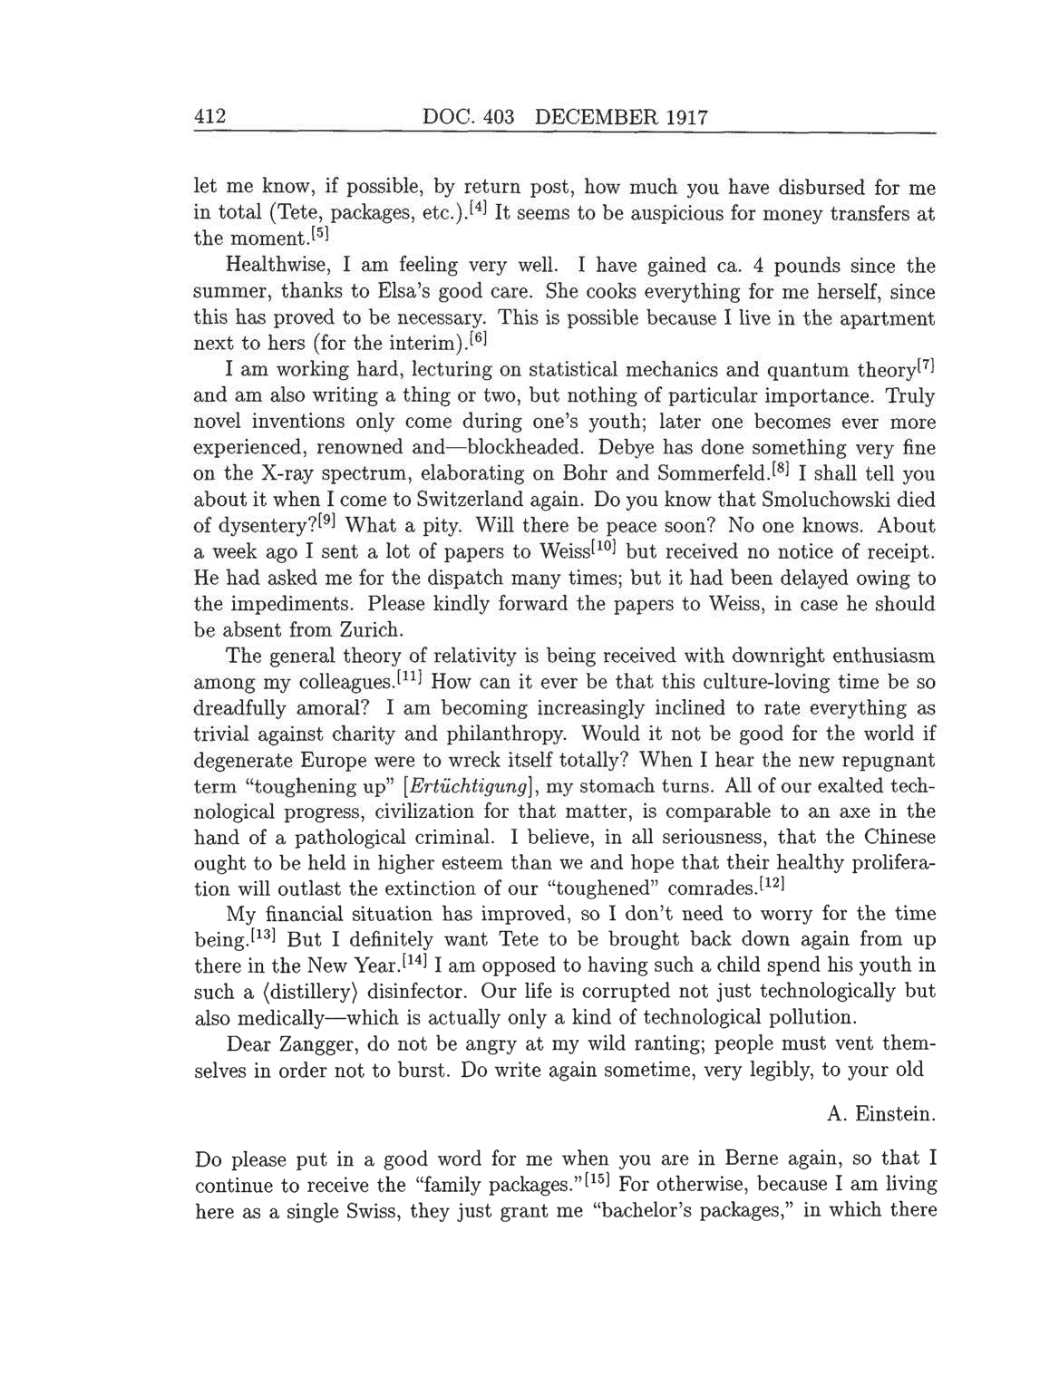 Volume 8: The Berlin Years: Correspondence, 1914-1918 (English translation supplement) page 412